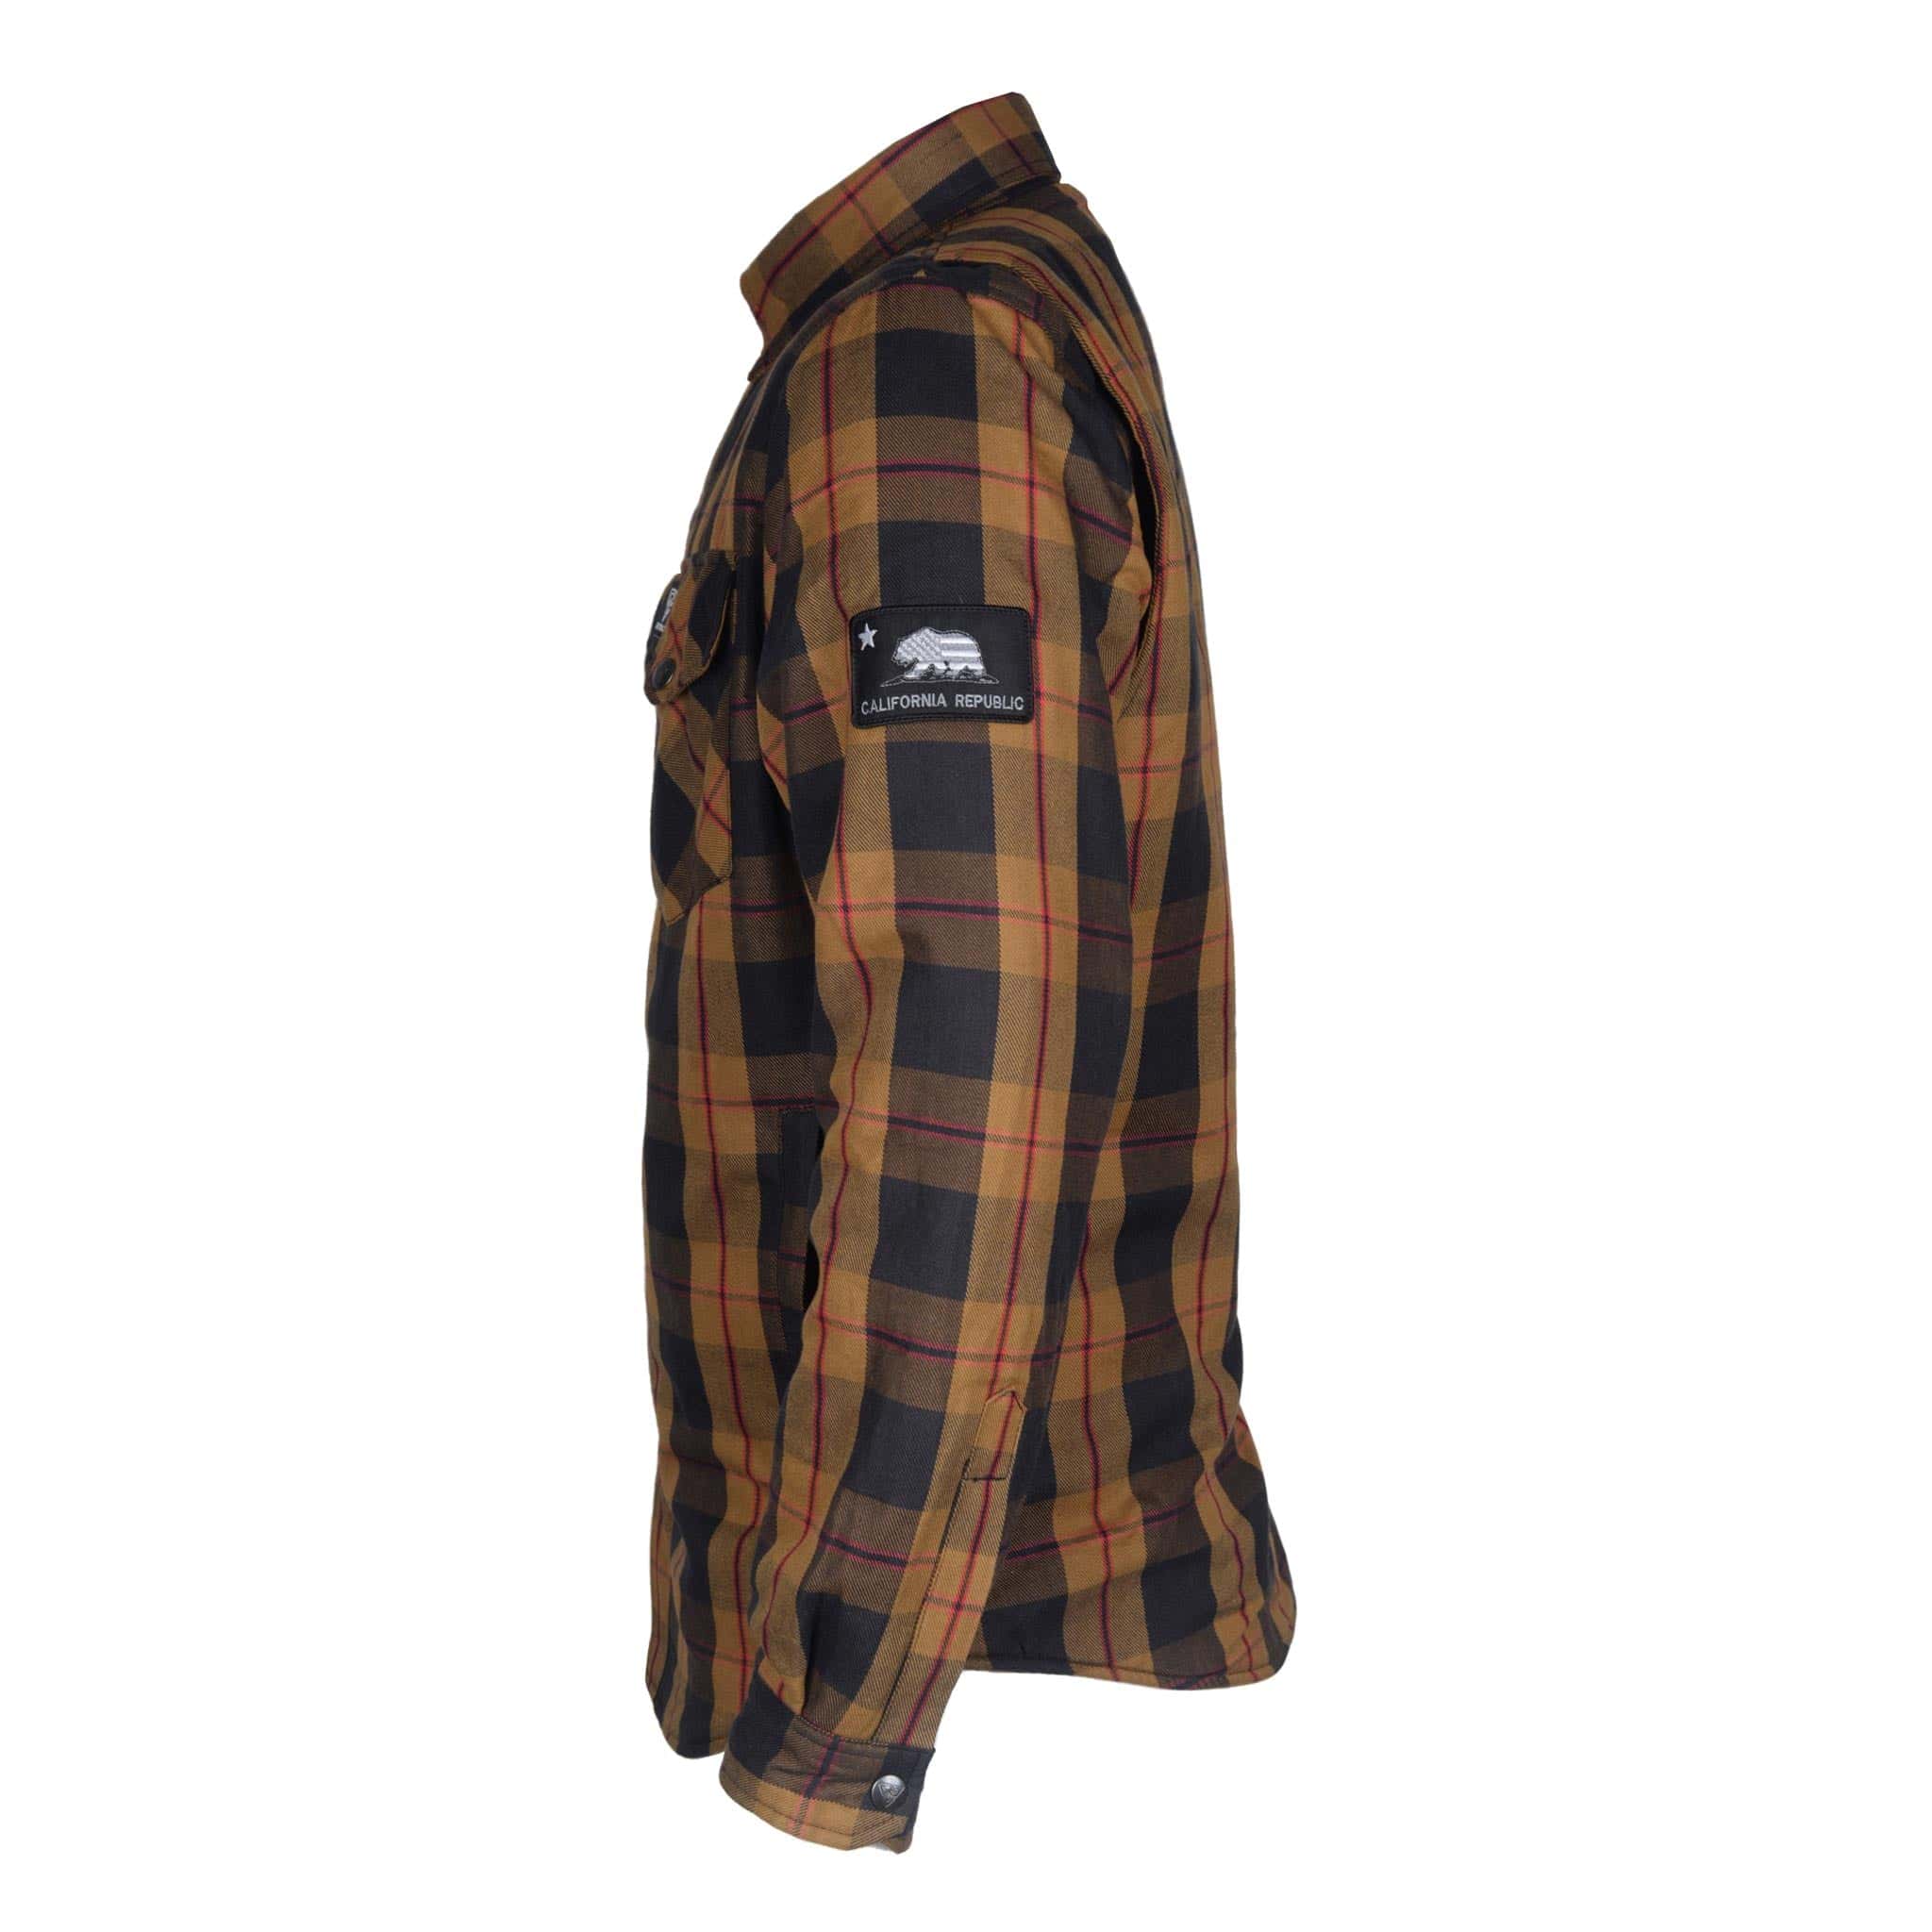 Protective Flannel Shirt "Wild West" - Brown, Black, Red with Pads